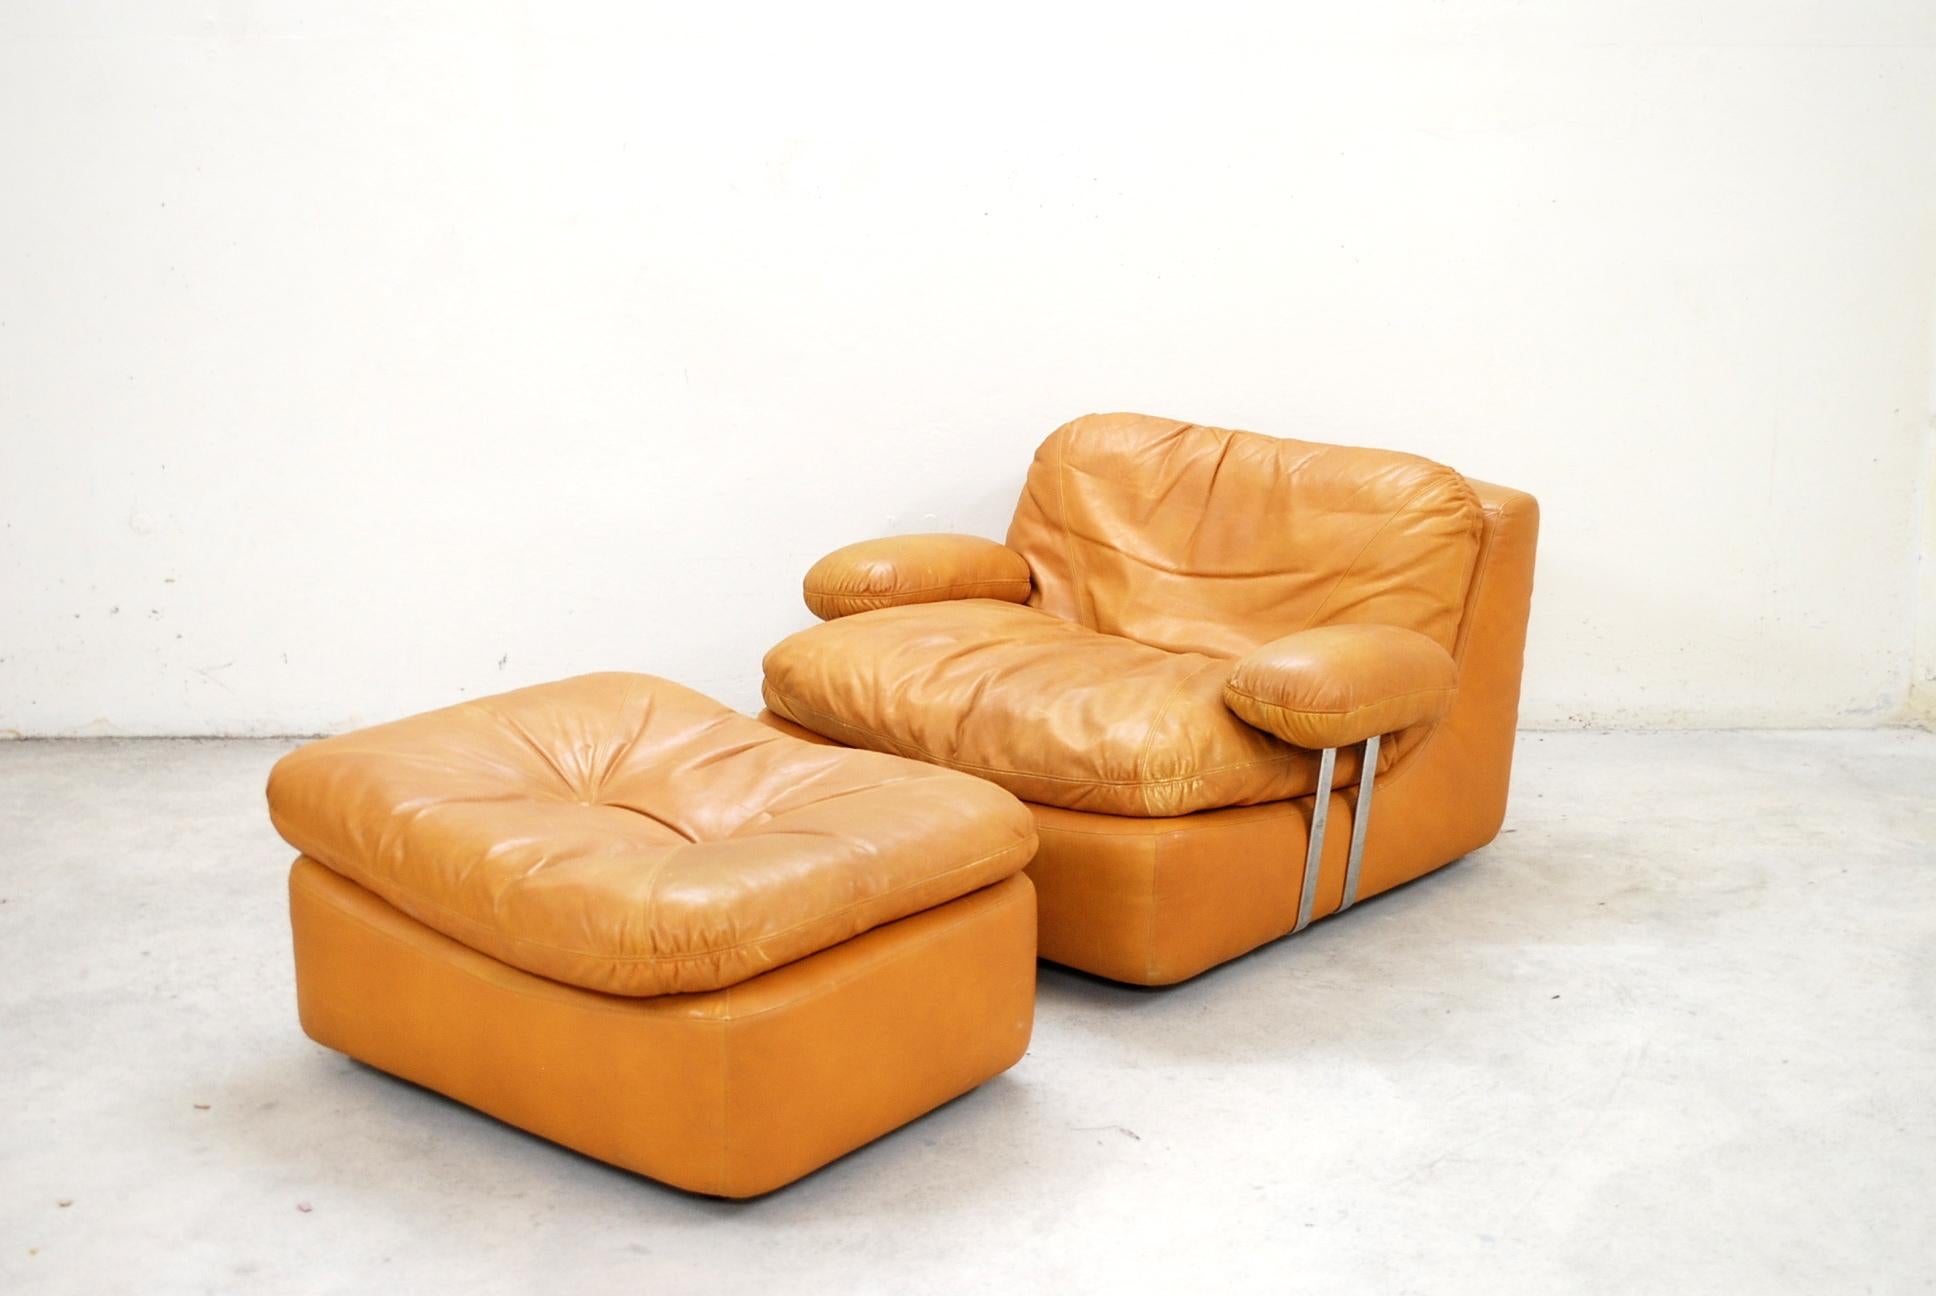 This lounge chair and ottoman were manufactured by Dreipunkt International and are upholstered in cognac colored semi-aniline leather. 
They feature black plastic feet, removable armrests with chromed metal sides and loose cushions filled with